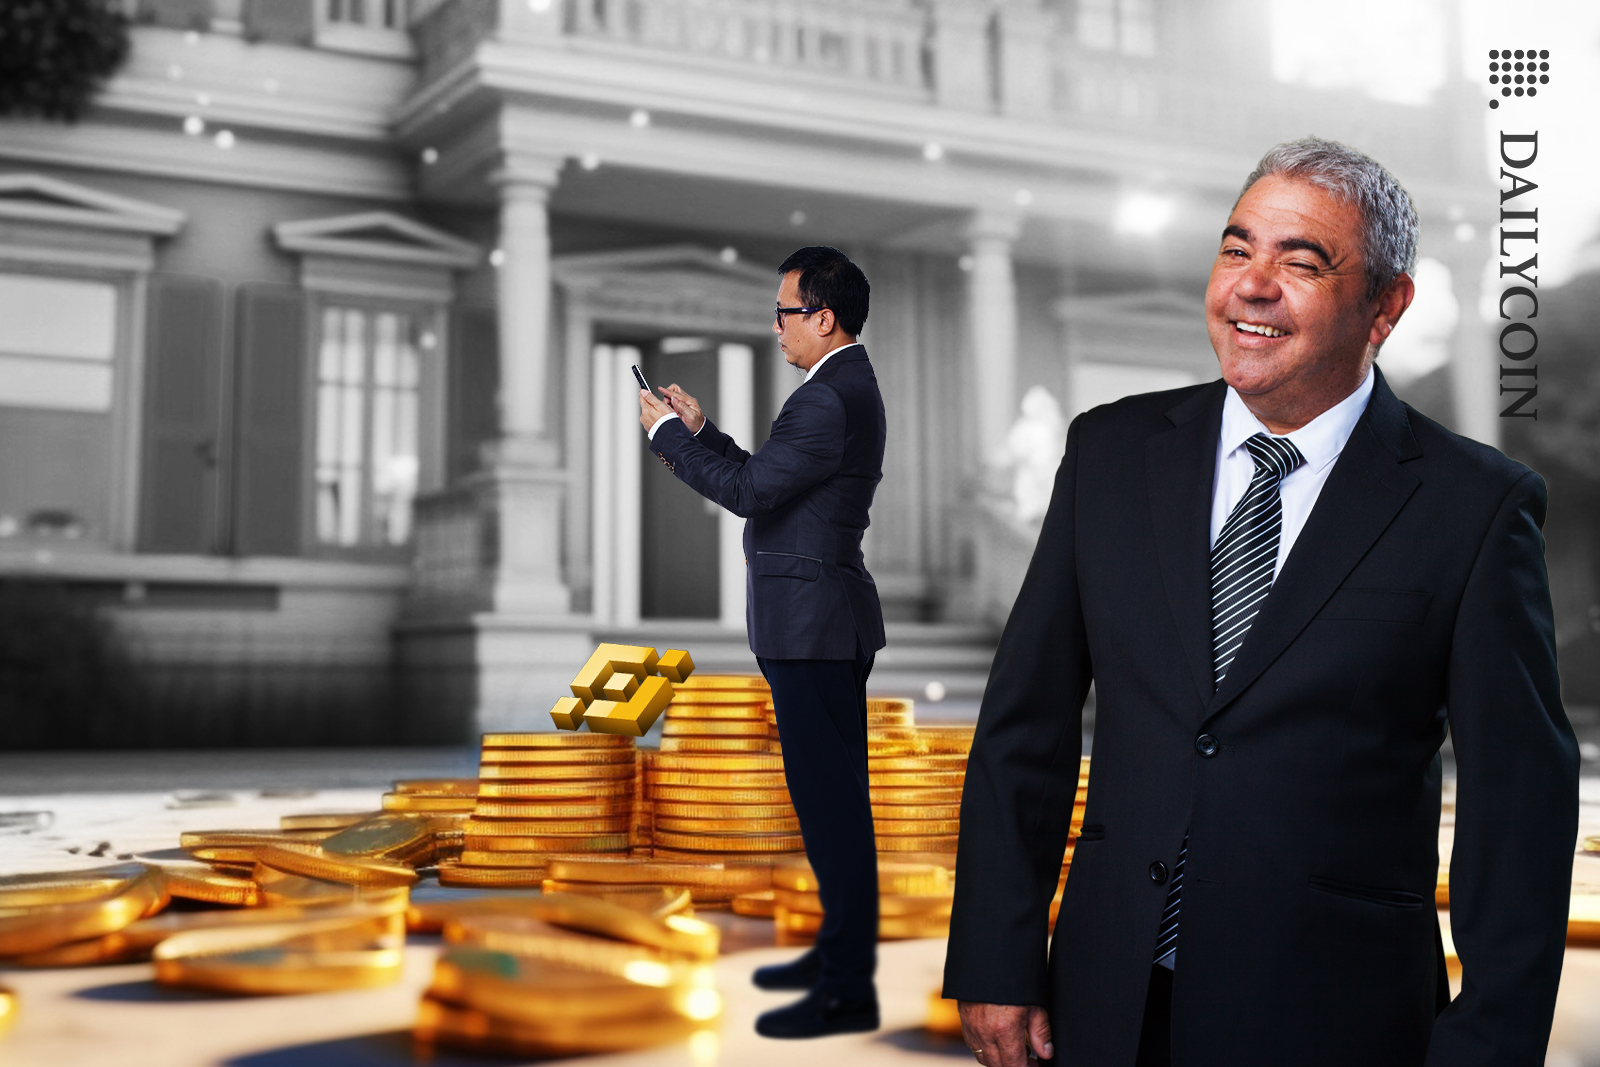 Coins laying in front of a bank, a business man using his mobile. A banker facing forward winking.